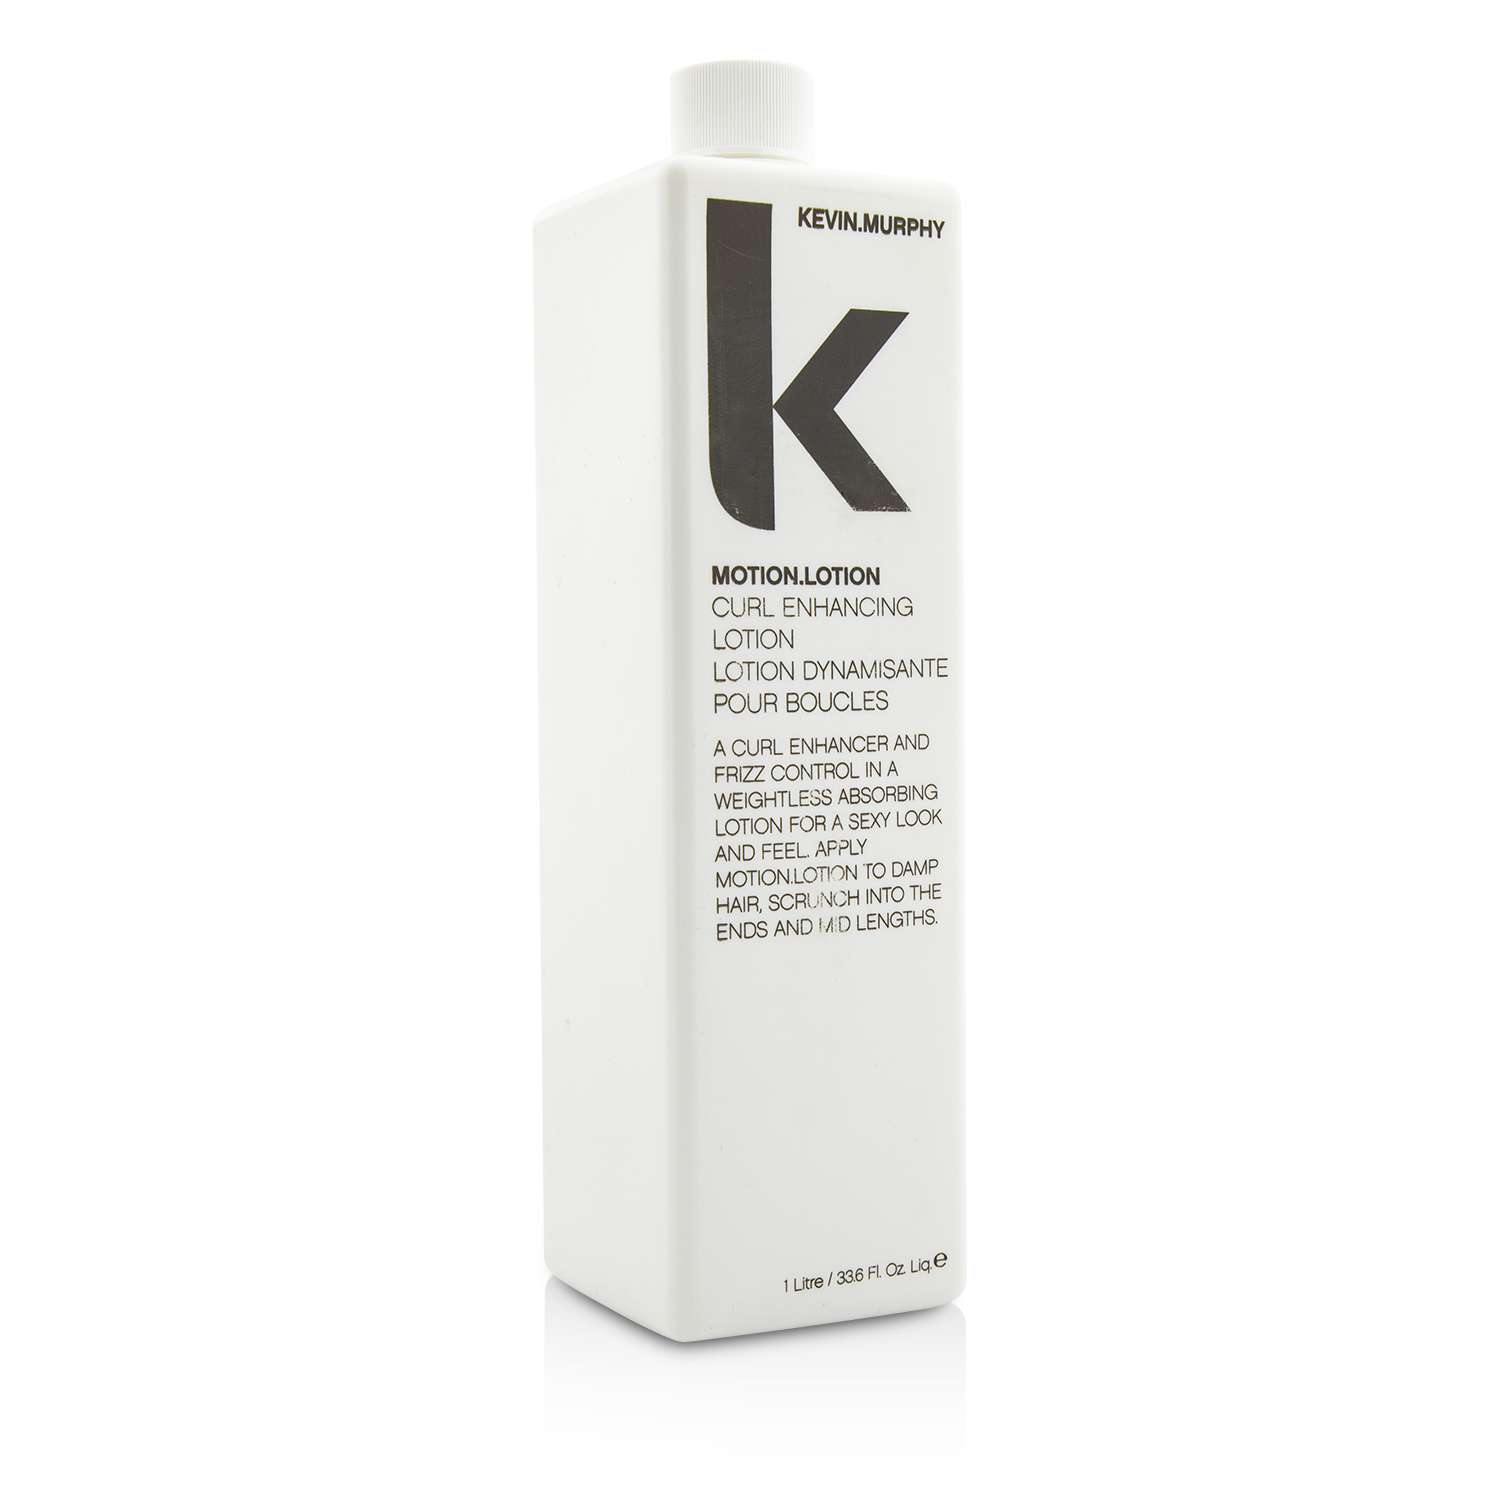 Motion.Lotion (Curl Enhancing Lotion - For A Sexy Look and Feel) Kevin.Murphy Image